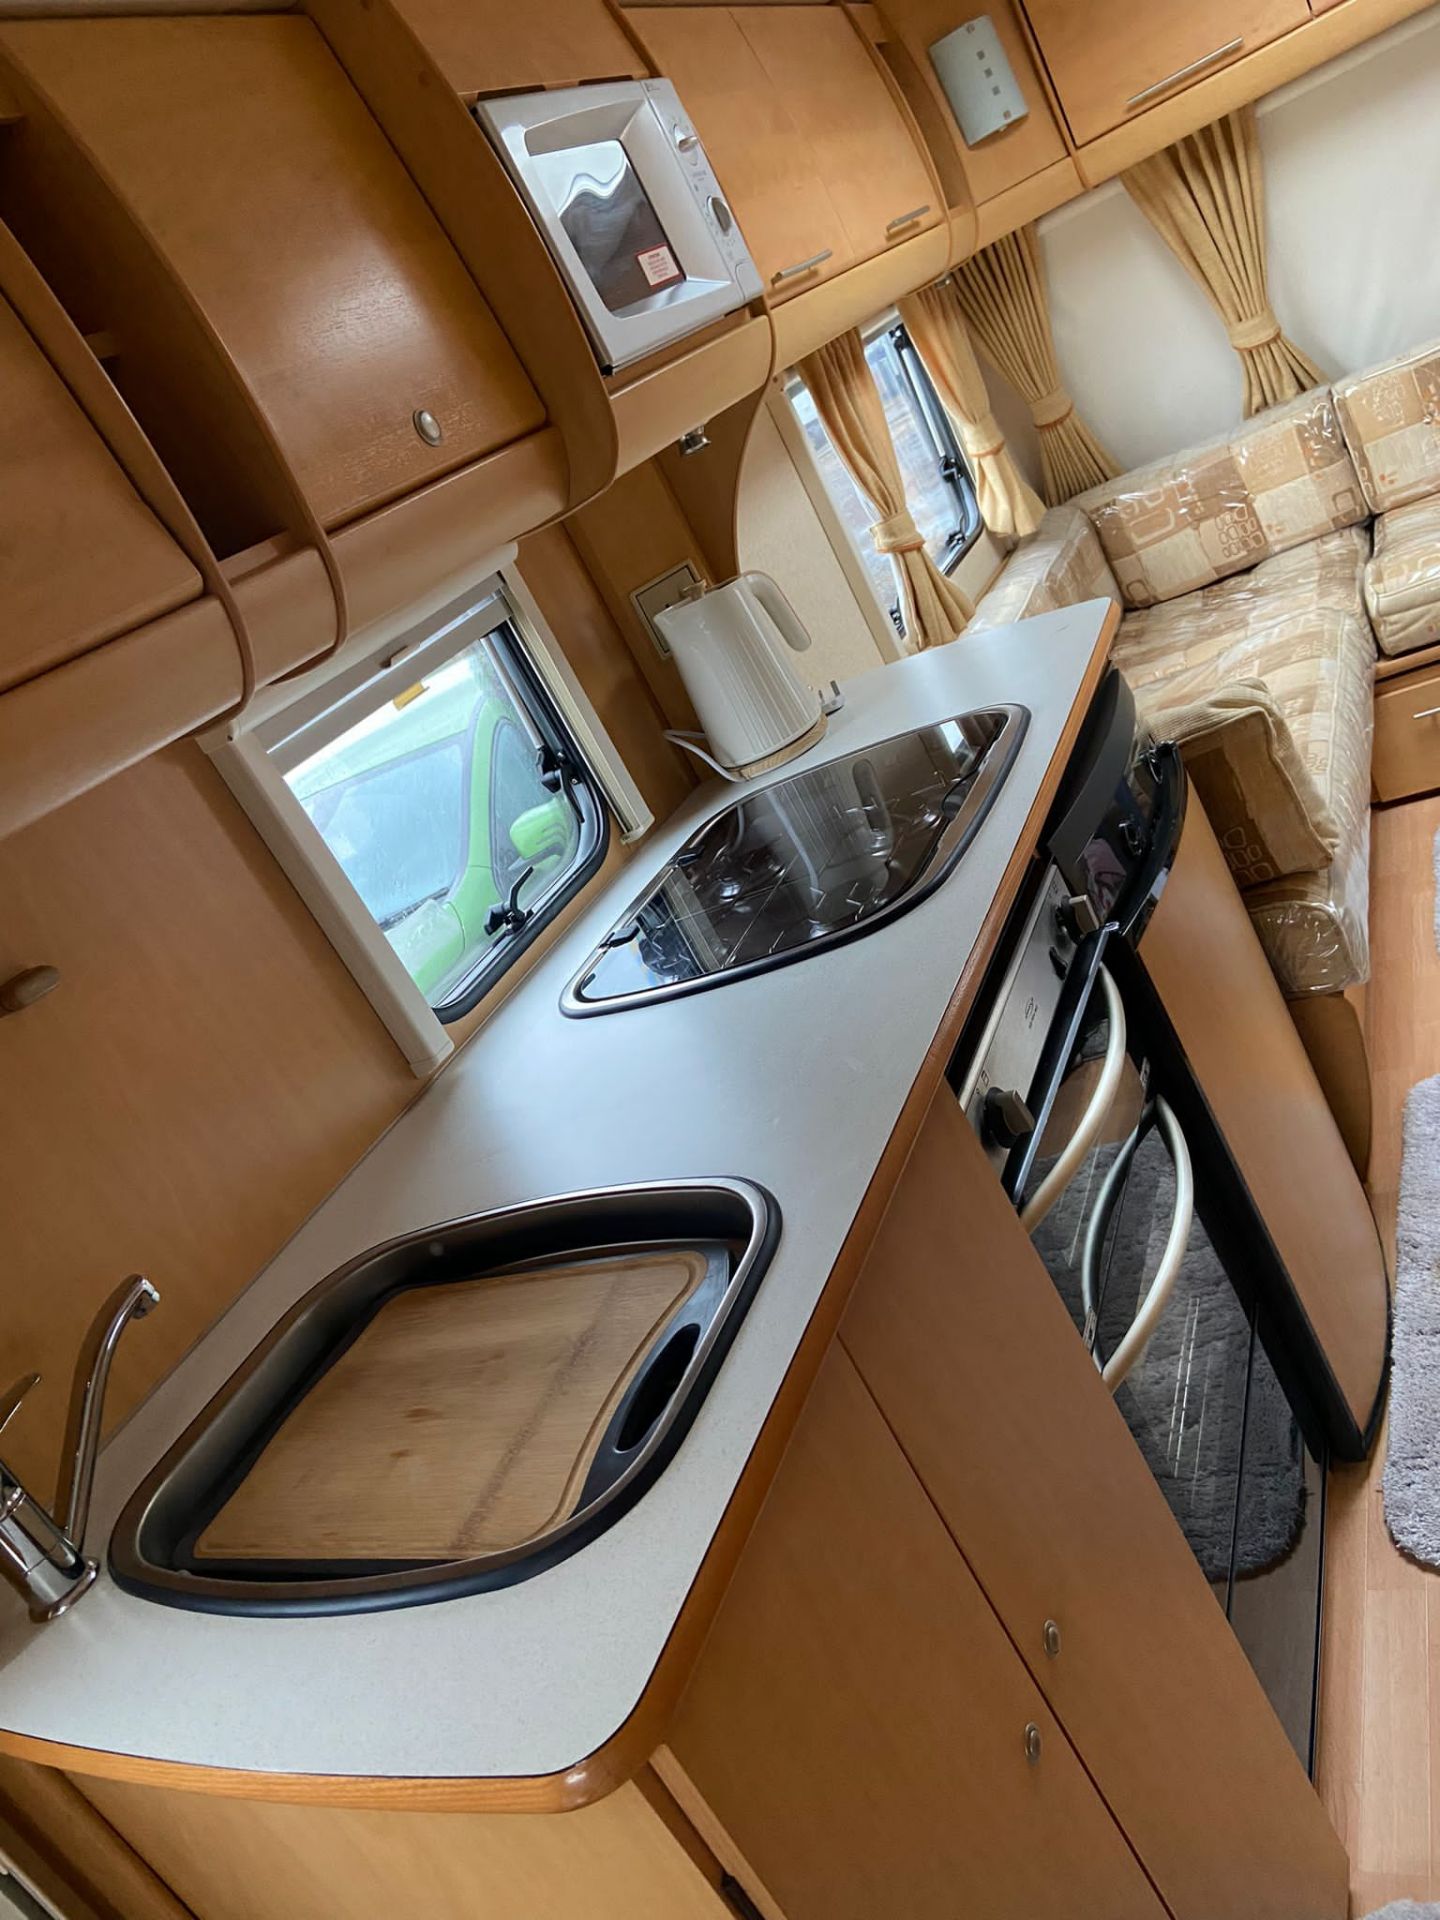 ** ON SALE ** Bailey Pageant series 6 - 4 Berth - '2007 Year' Middle Bathroom - No Vat - Image 8 of 11